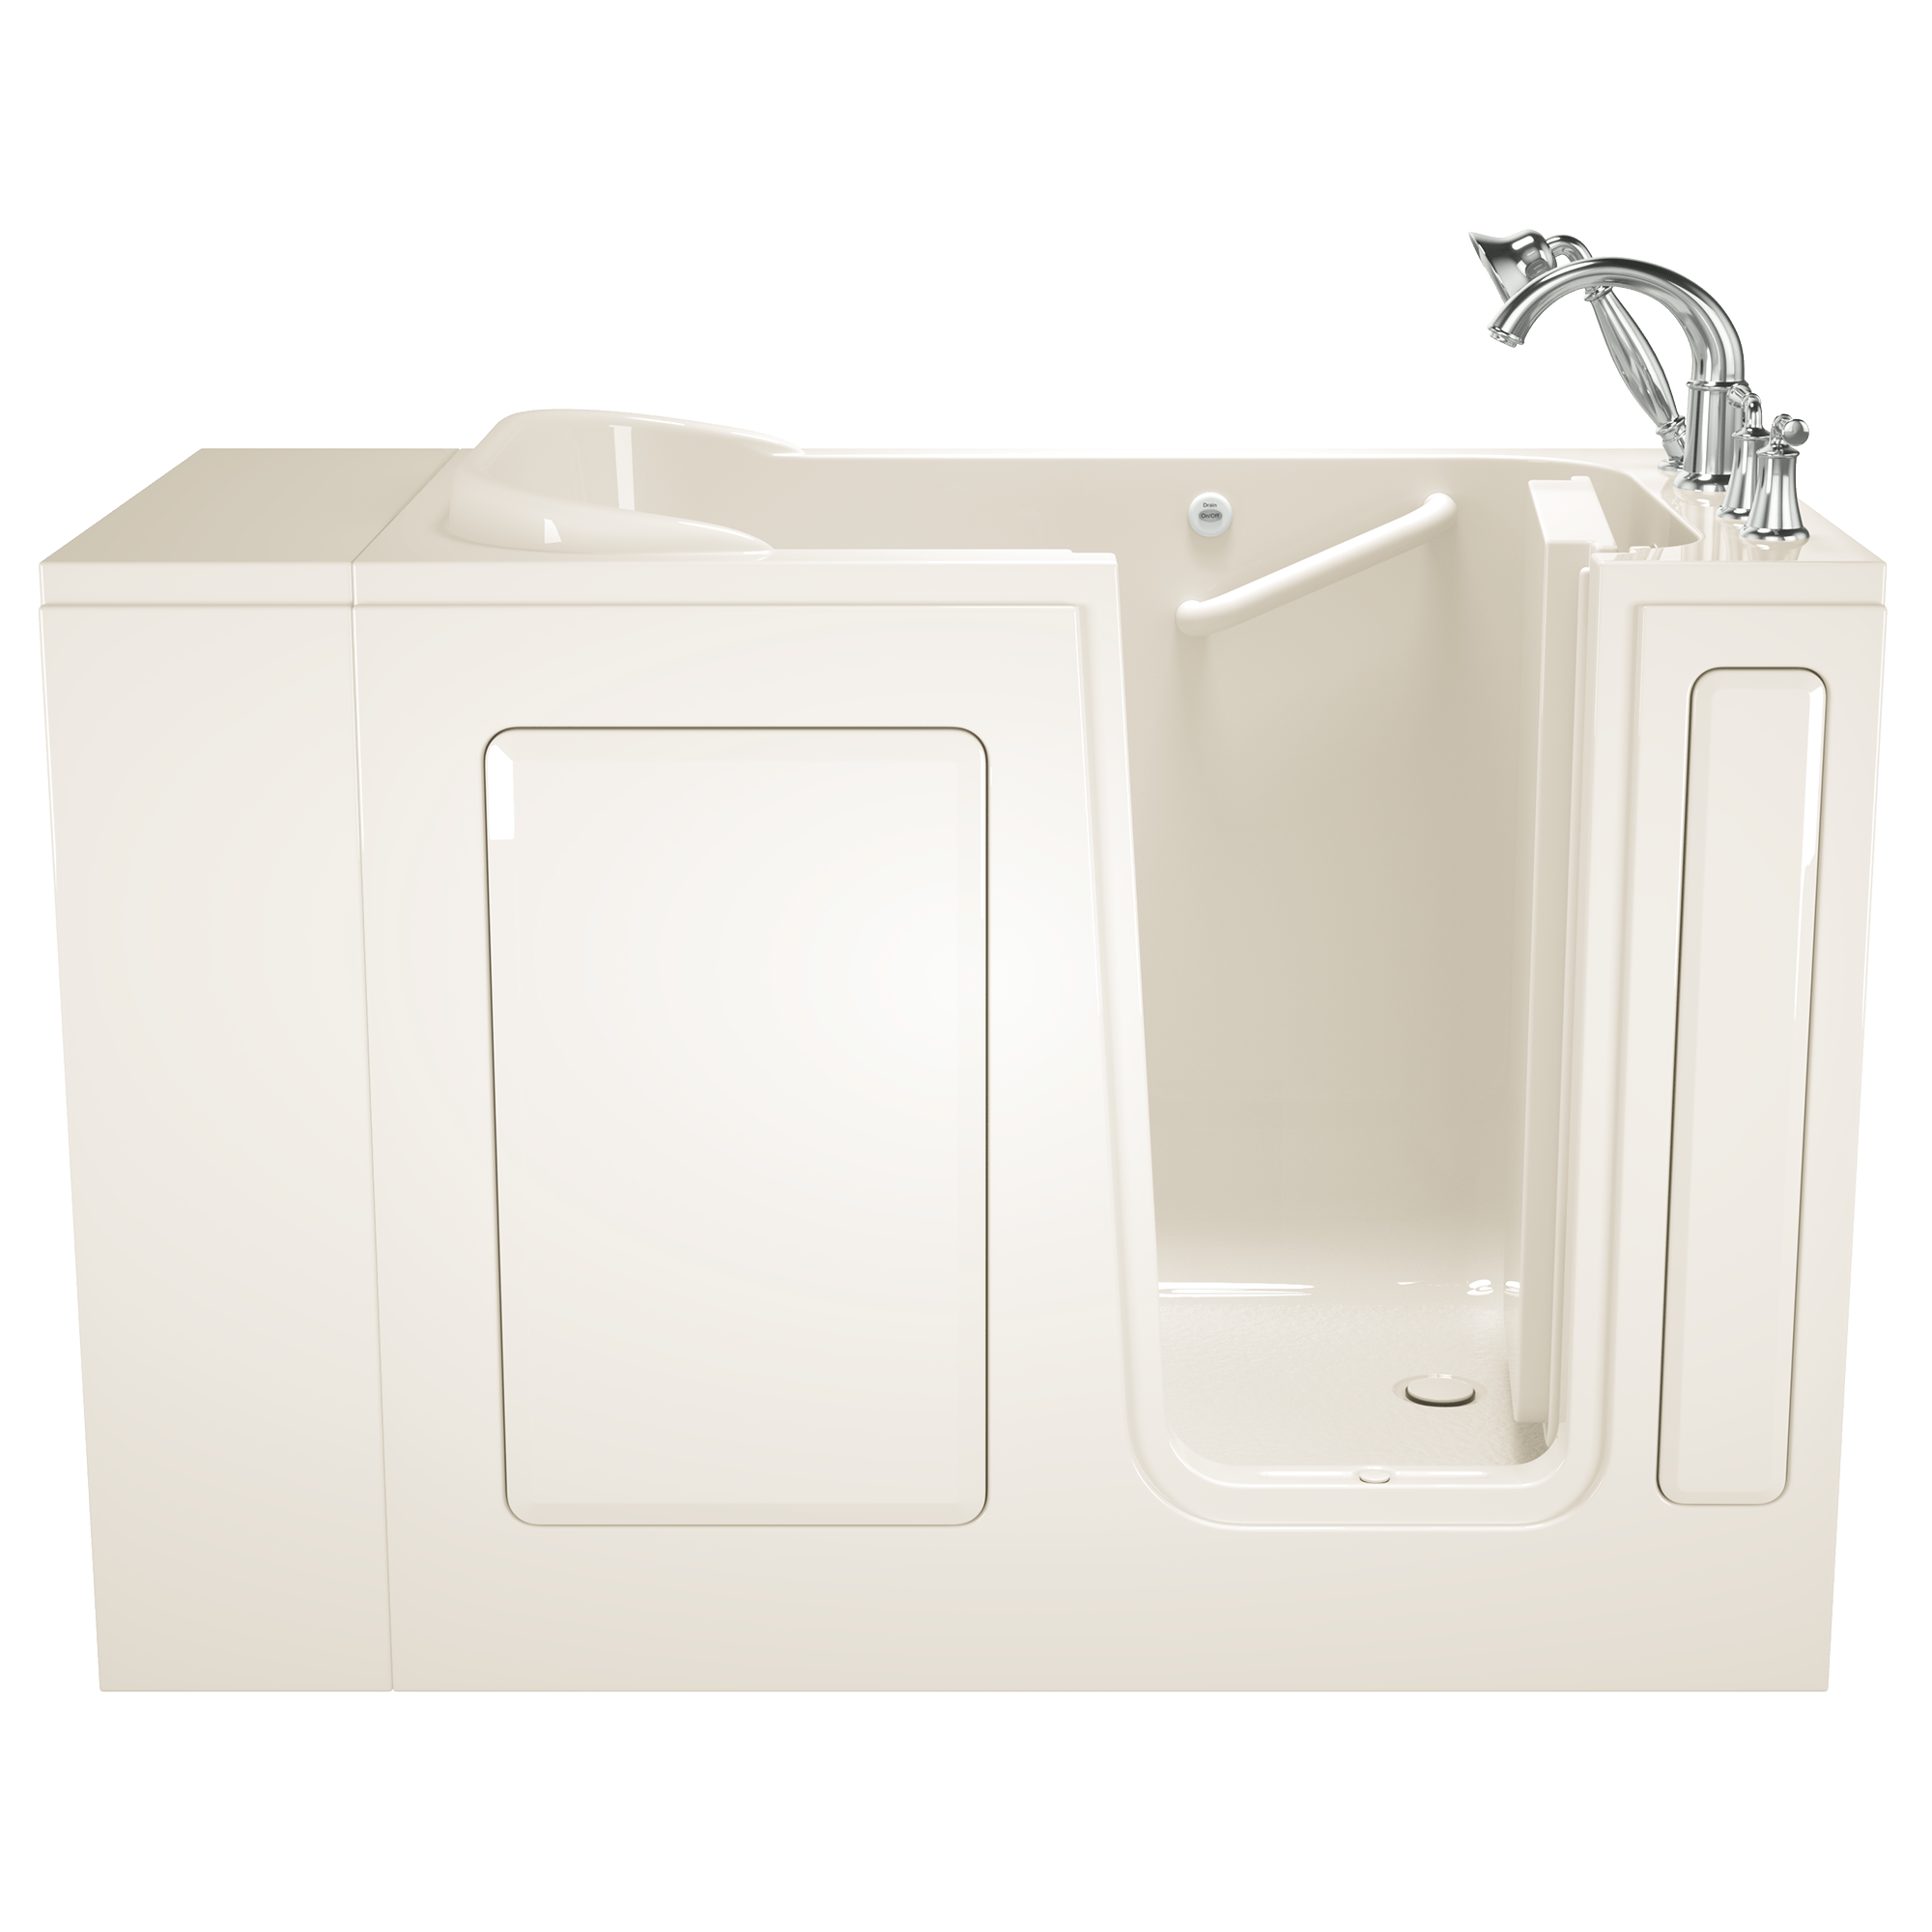 Gelcoat Value Series 28 x 48 Inch Walk in Tub With Soaker System   Right Hand Drain With Faucet WIB LINEN